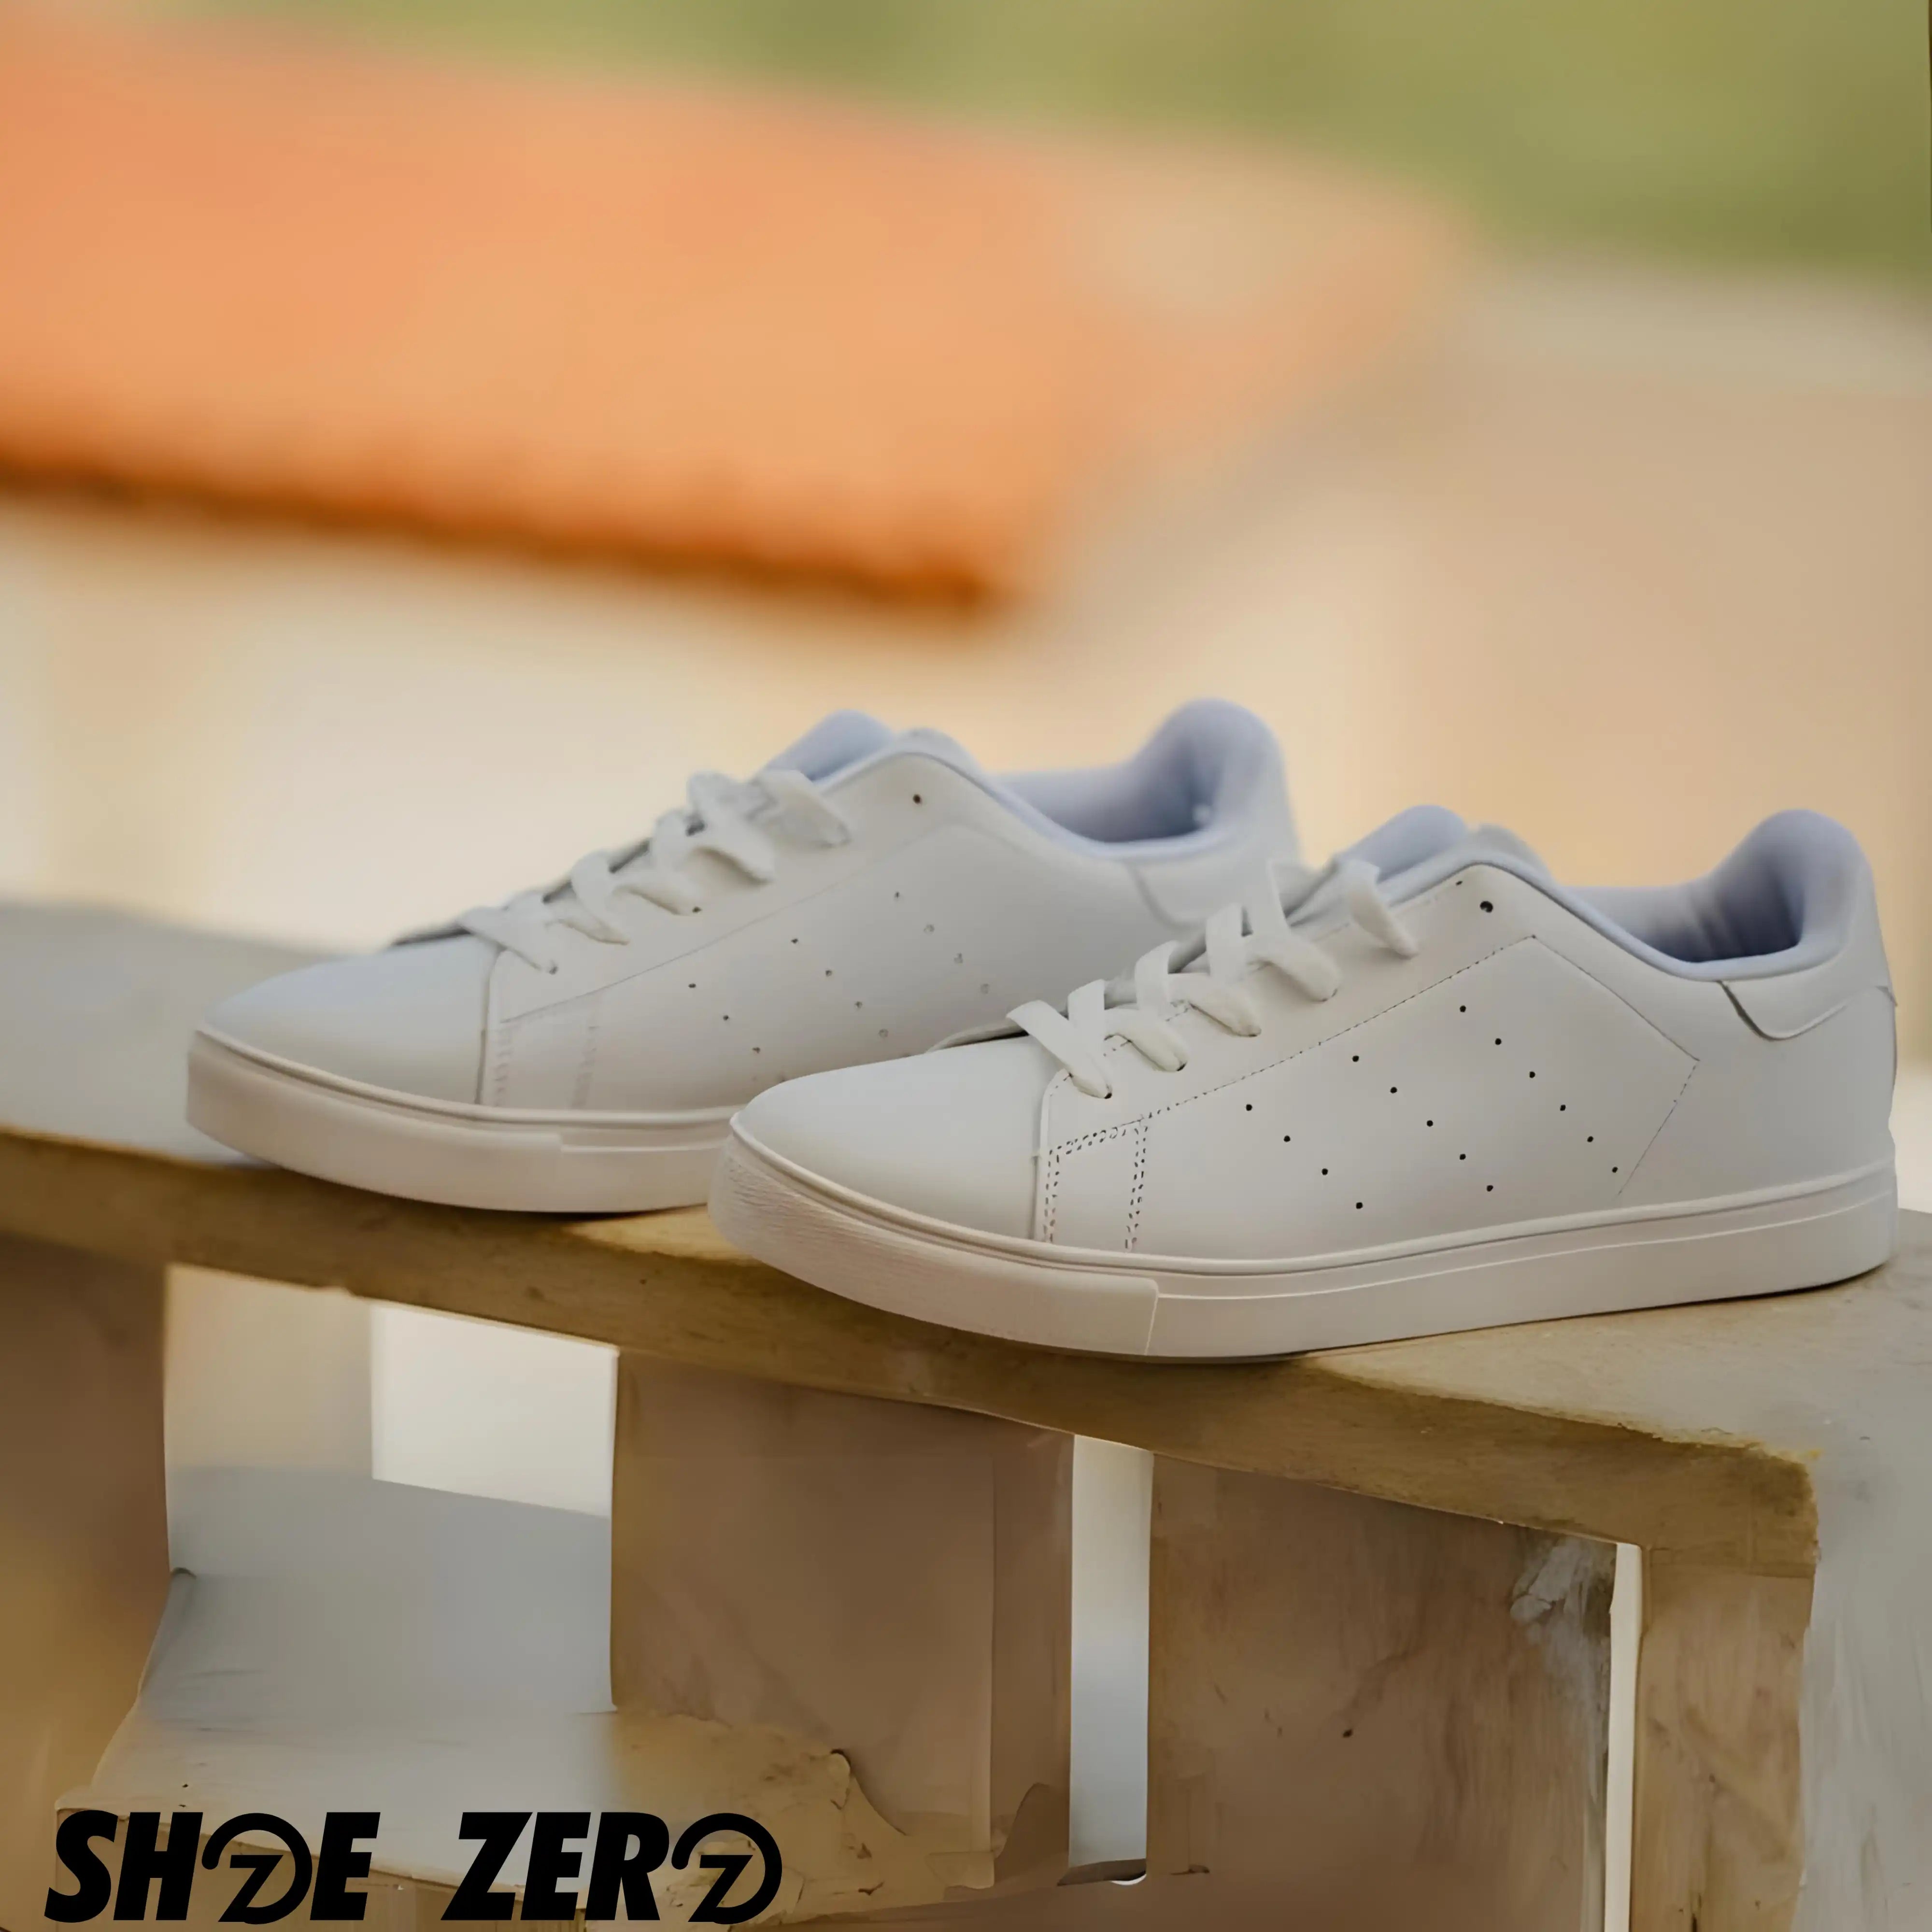 Customizable Breathable Vegan Leather Sneakers (White) | Design your own Low Top | Shoe Zero